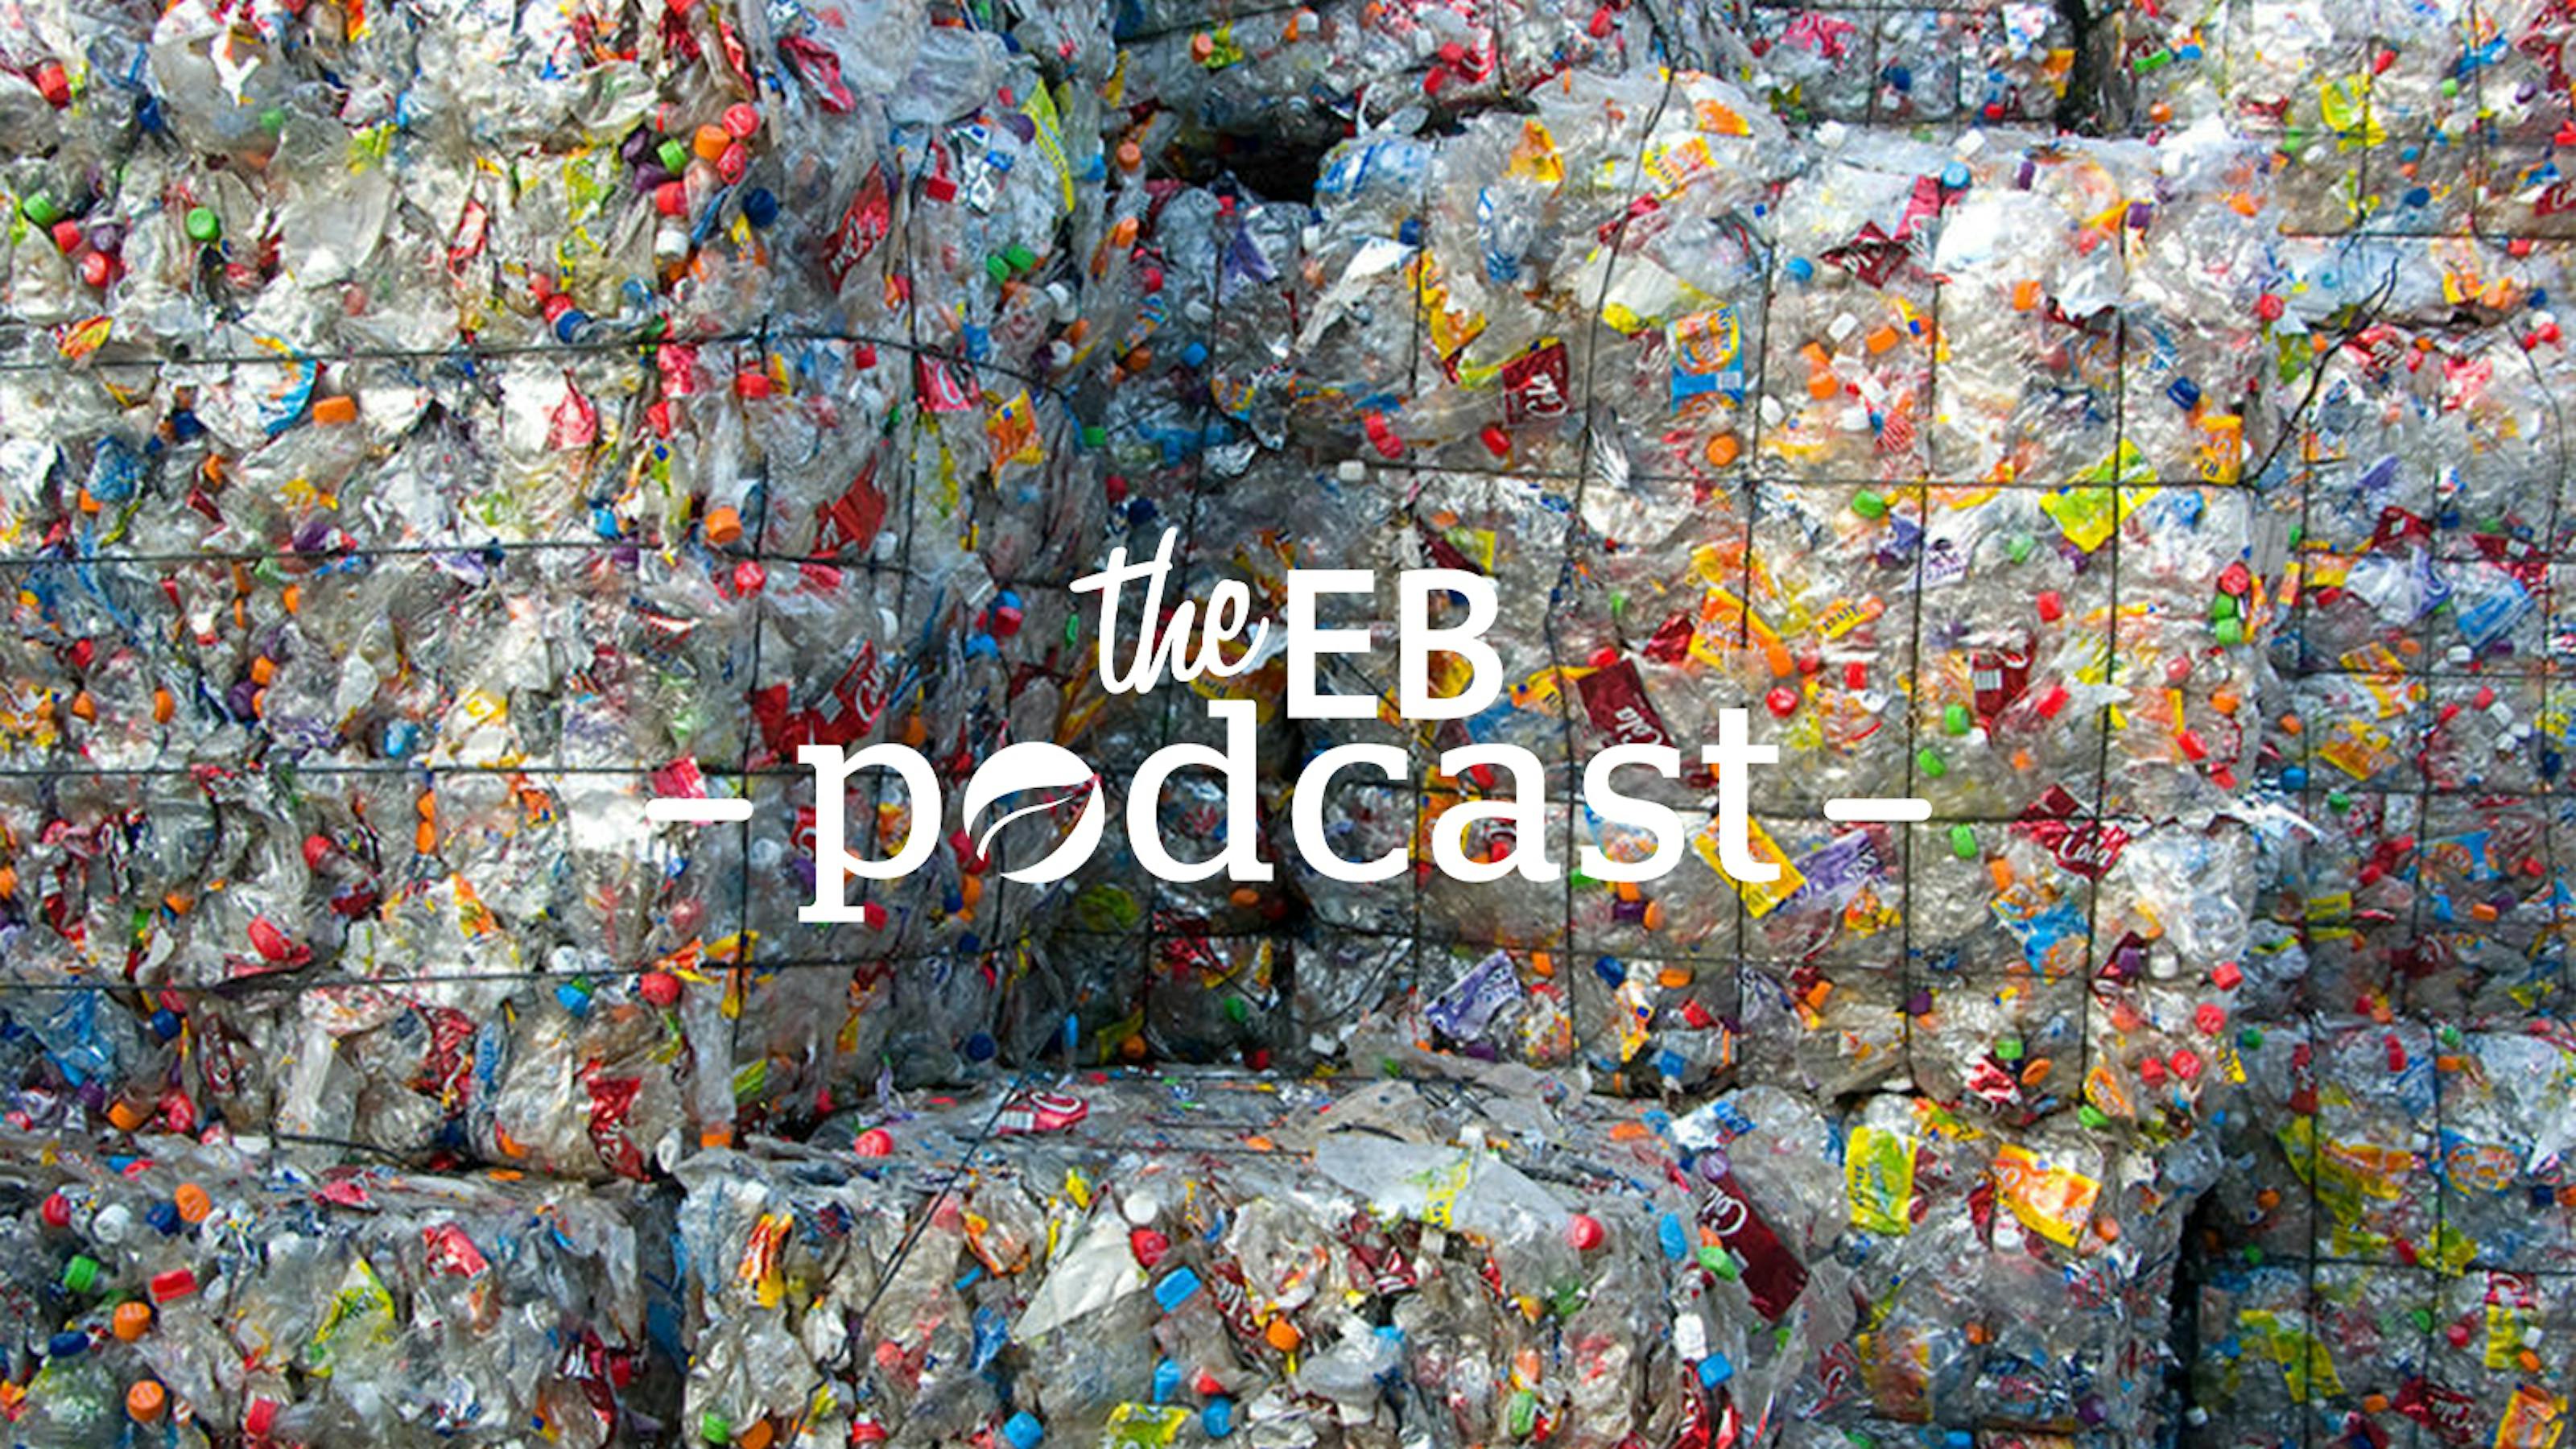 How to fix plastic recycling